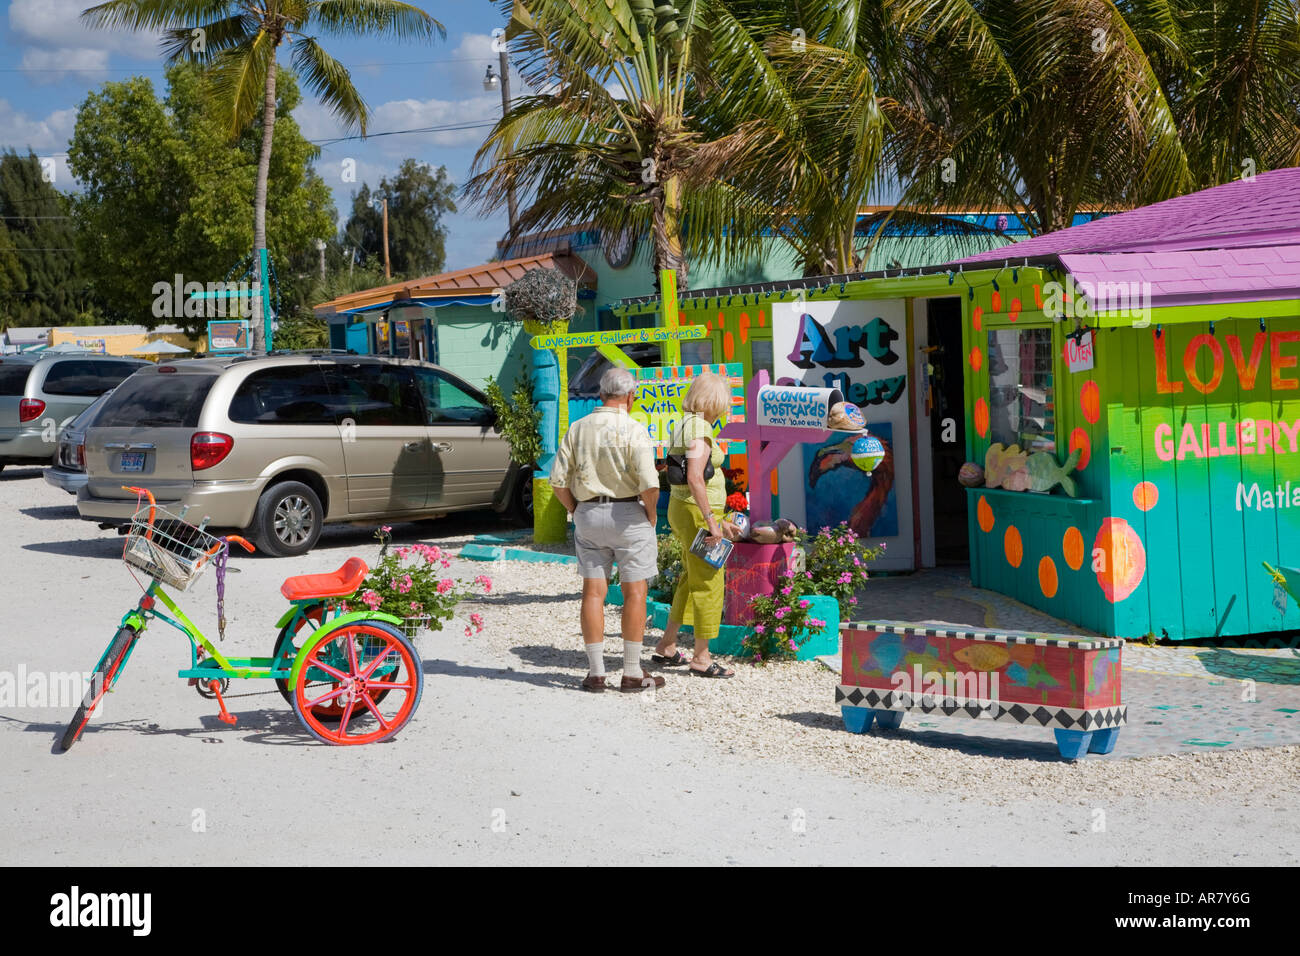 People shopping in colorful shops on Pine Island Road in Matlacha Florida on the southwestern Gulf Coast of Florida Stock Photo